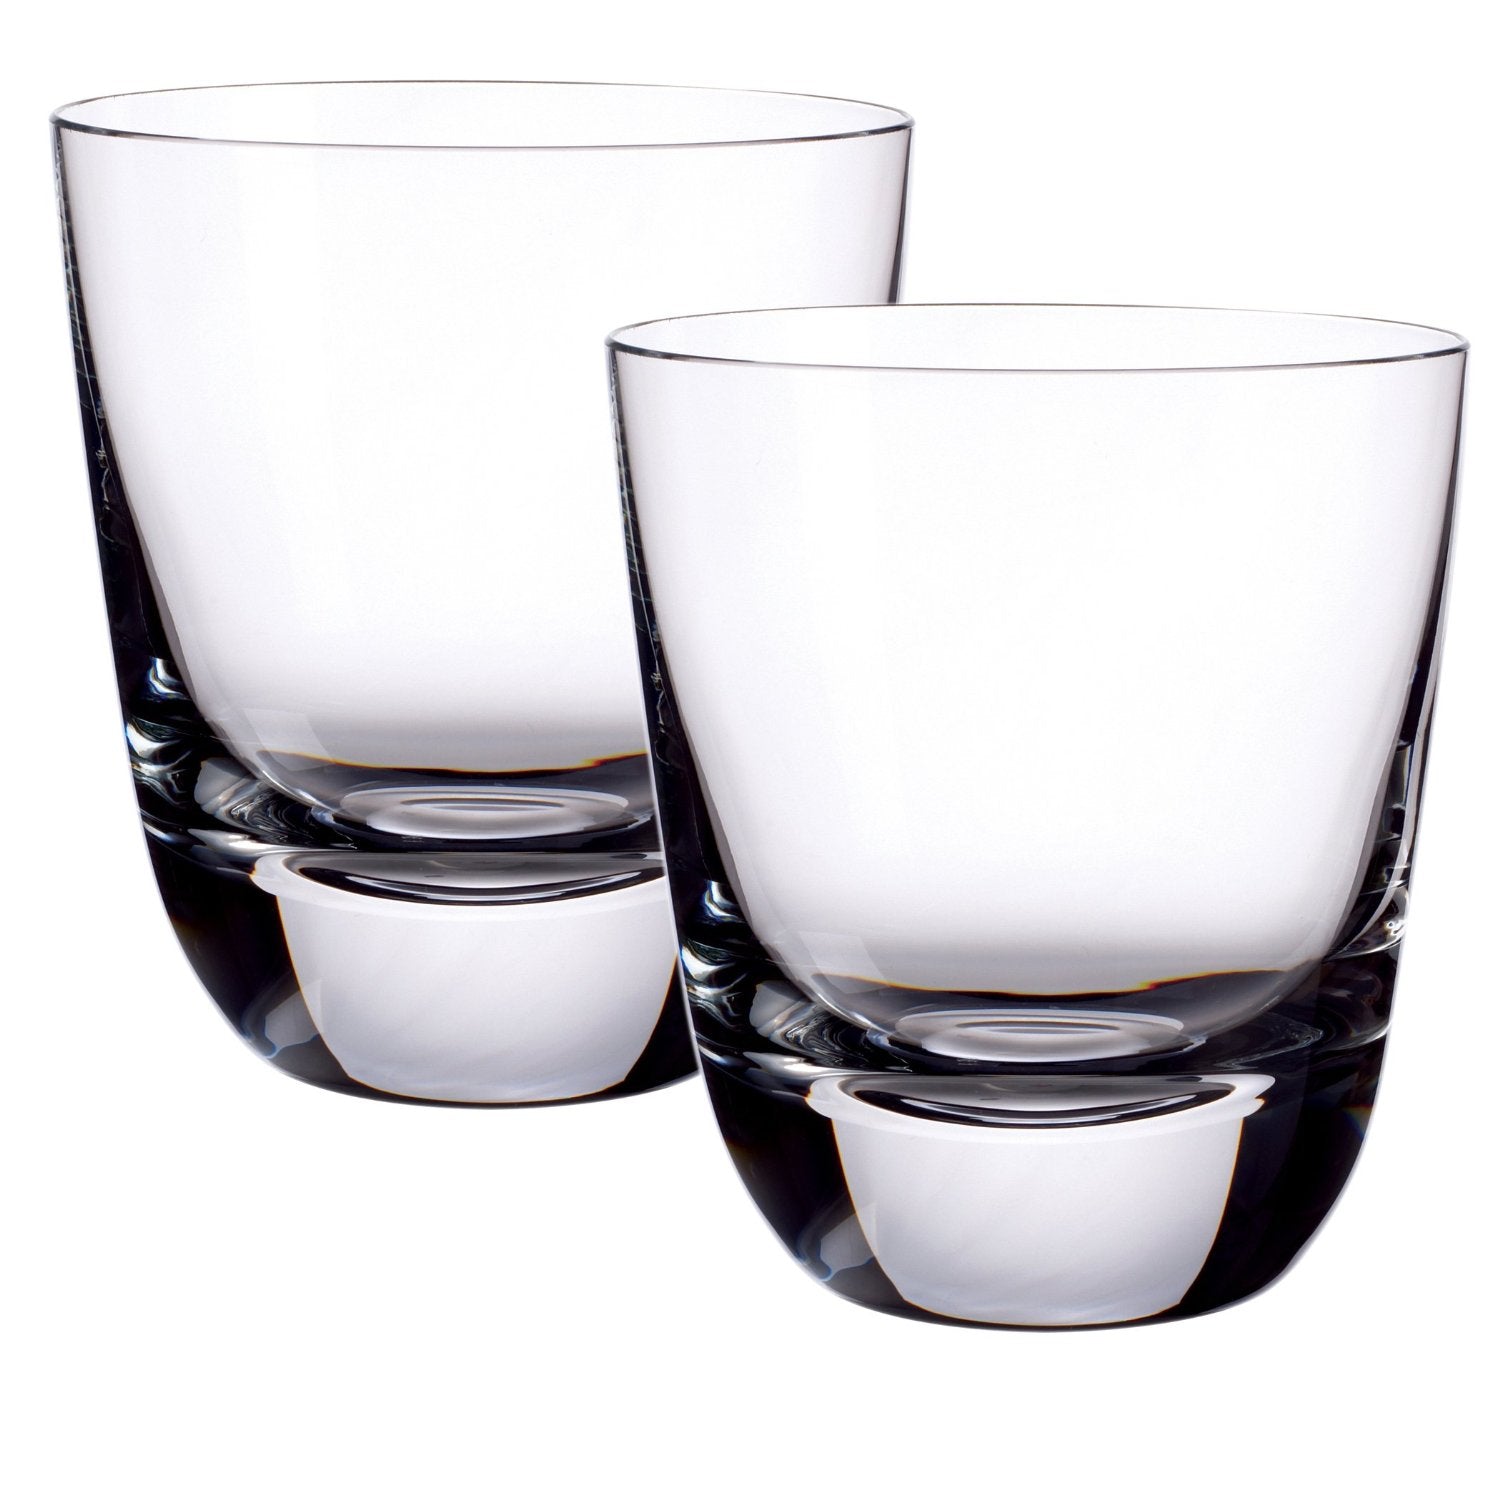 Villeroy & Boch American Bar Straight Bourbon 4-1/2 Inch Double Old Fashioned Tumbler, Set of 2